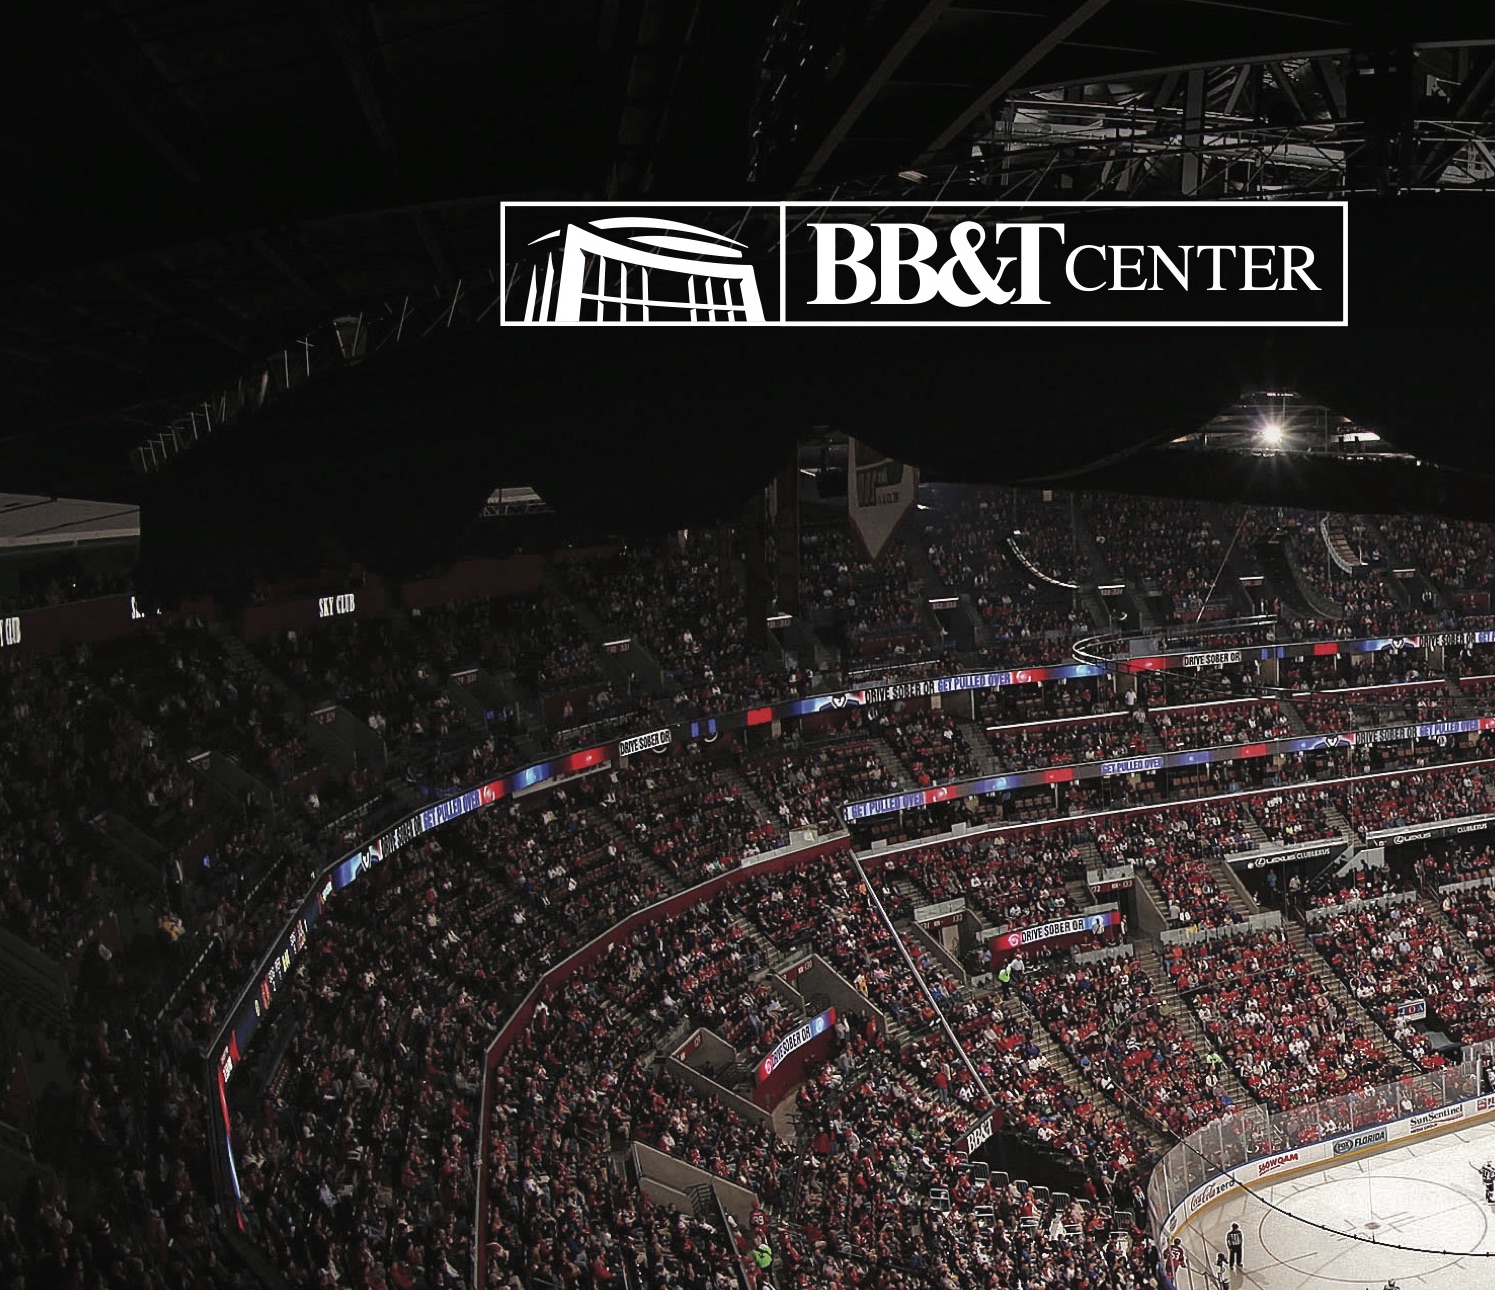 Aerial view of a hockey rink with BB&T Logo